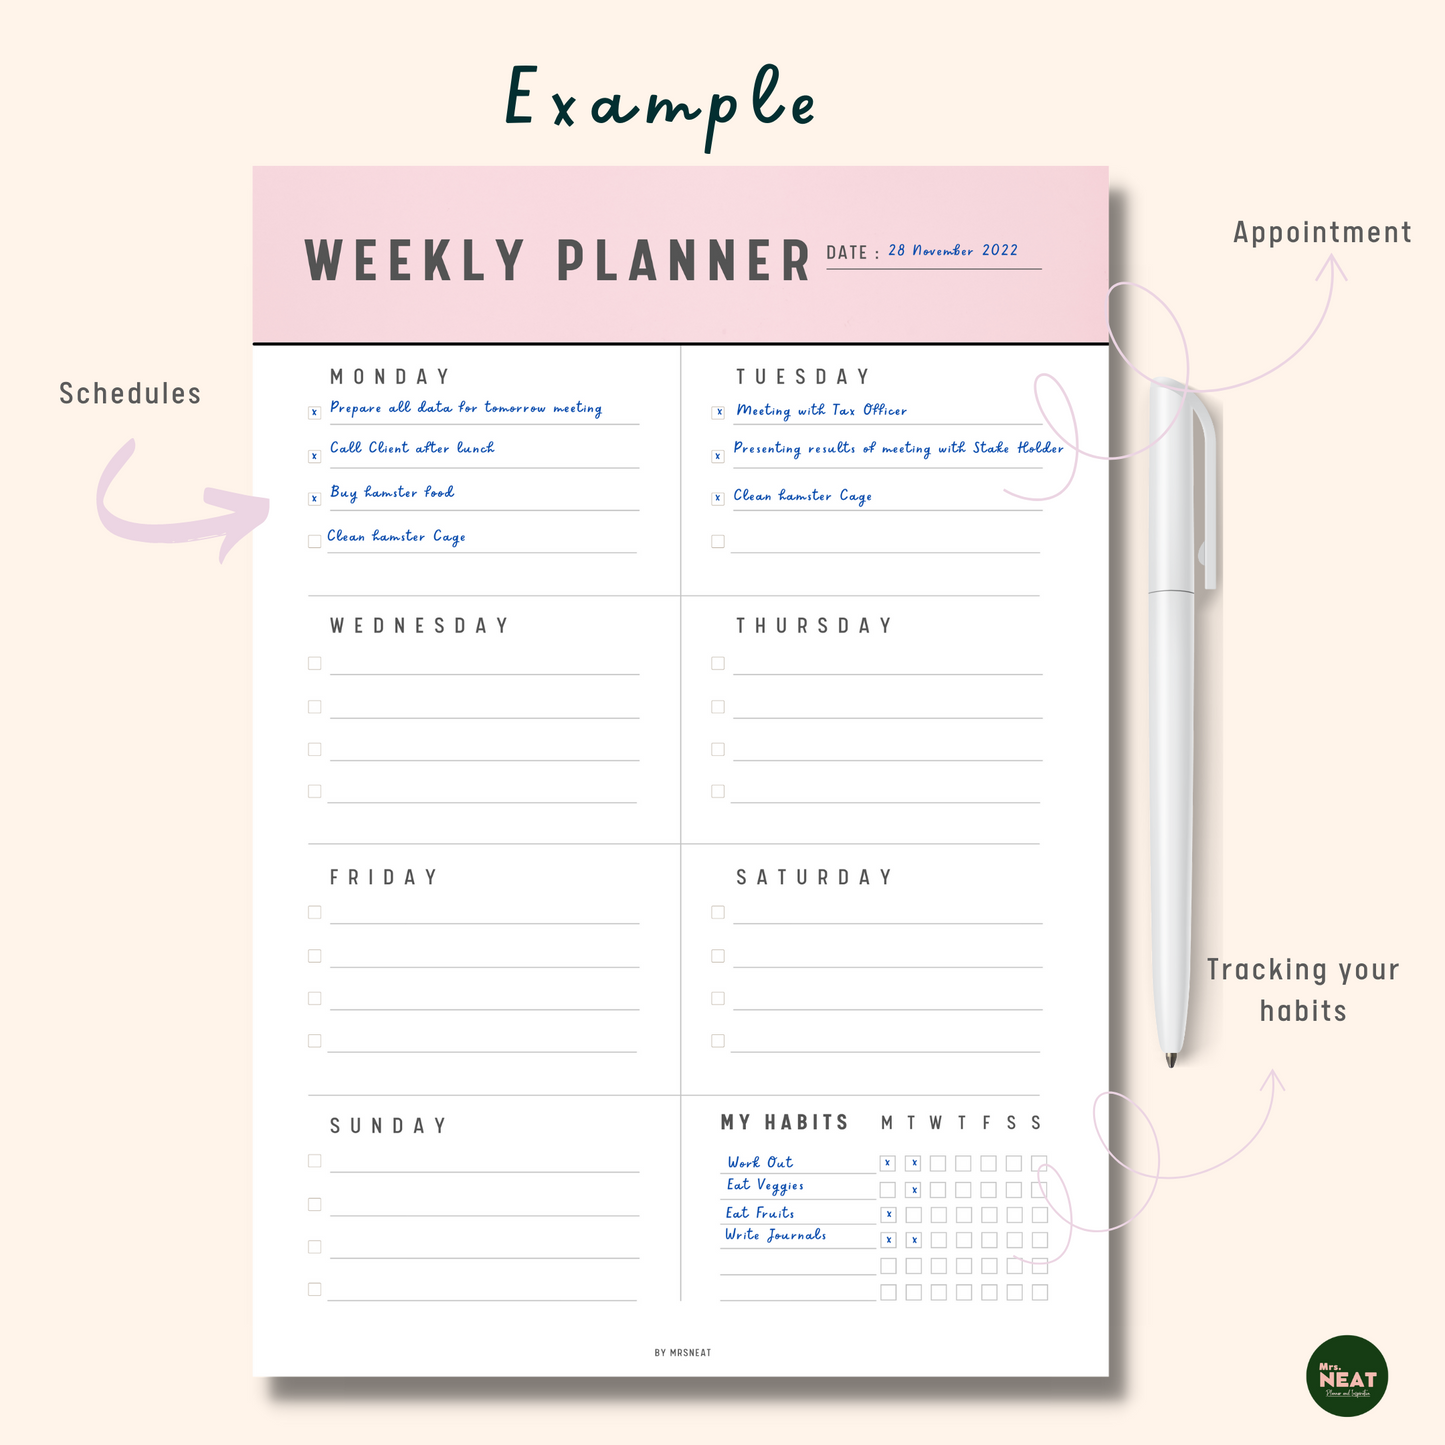 Beautiful pink weekly planner with dated, Monday and Tuesday Schedules and List of Habits as an example